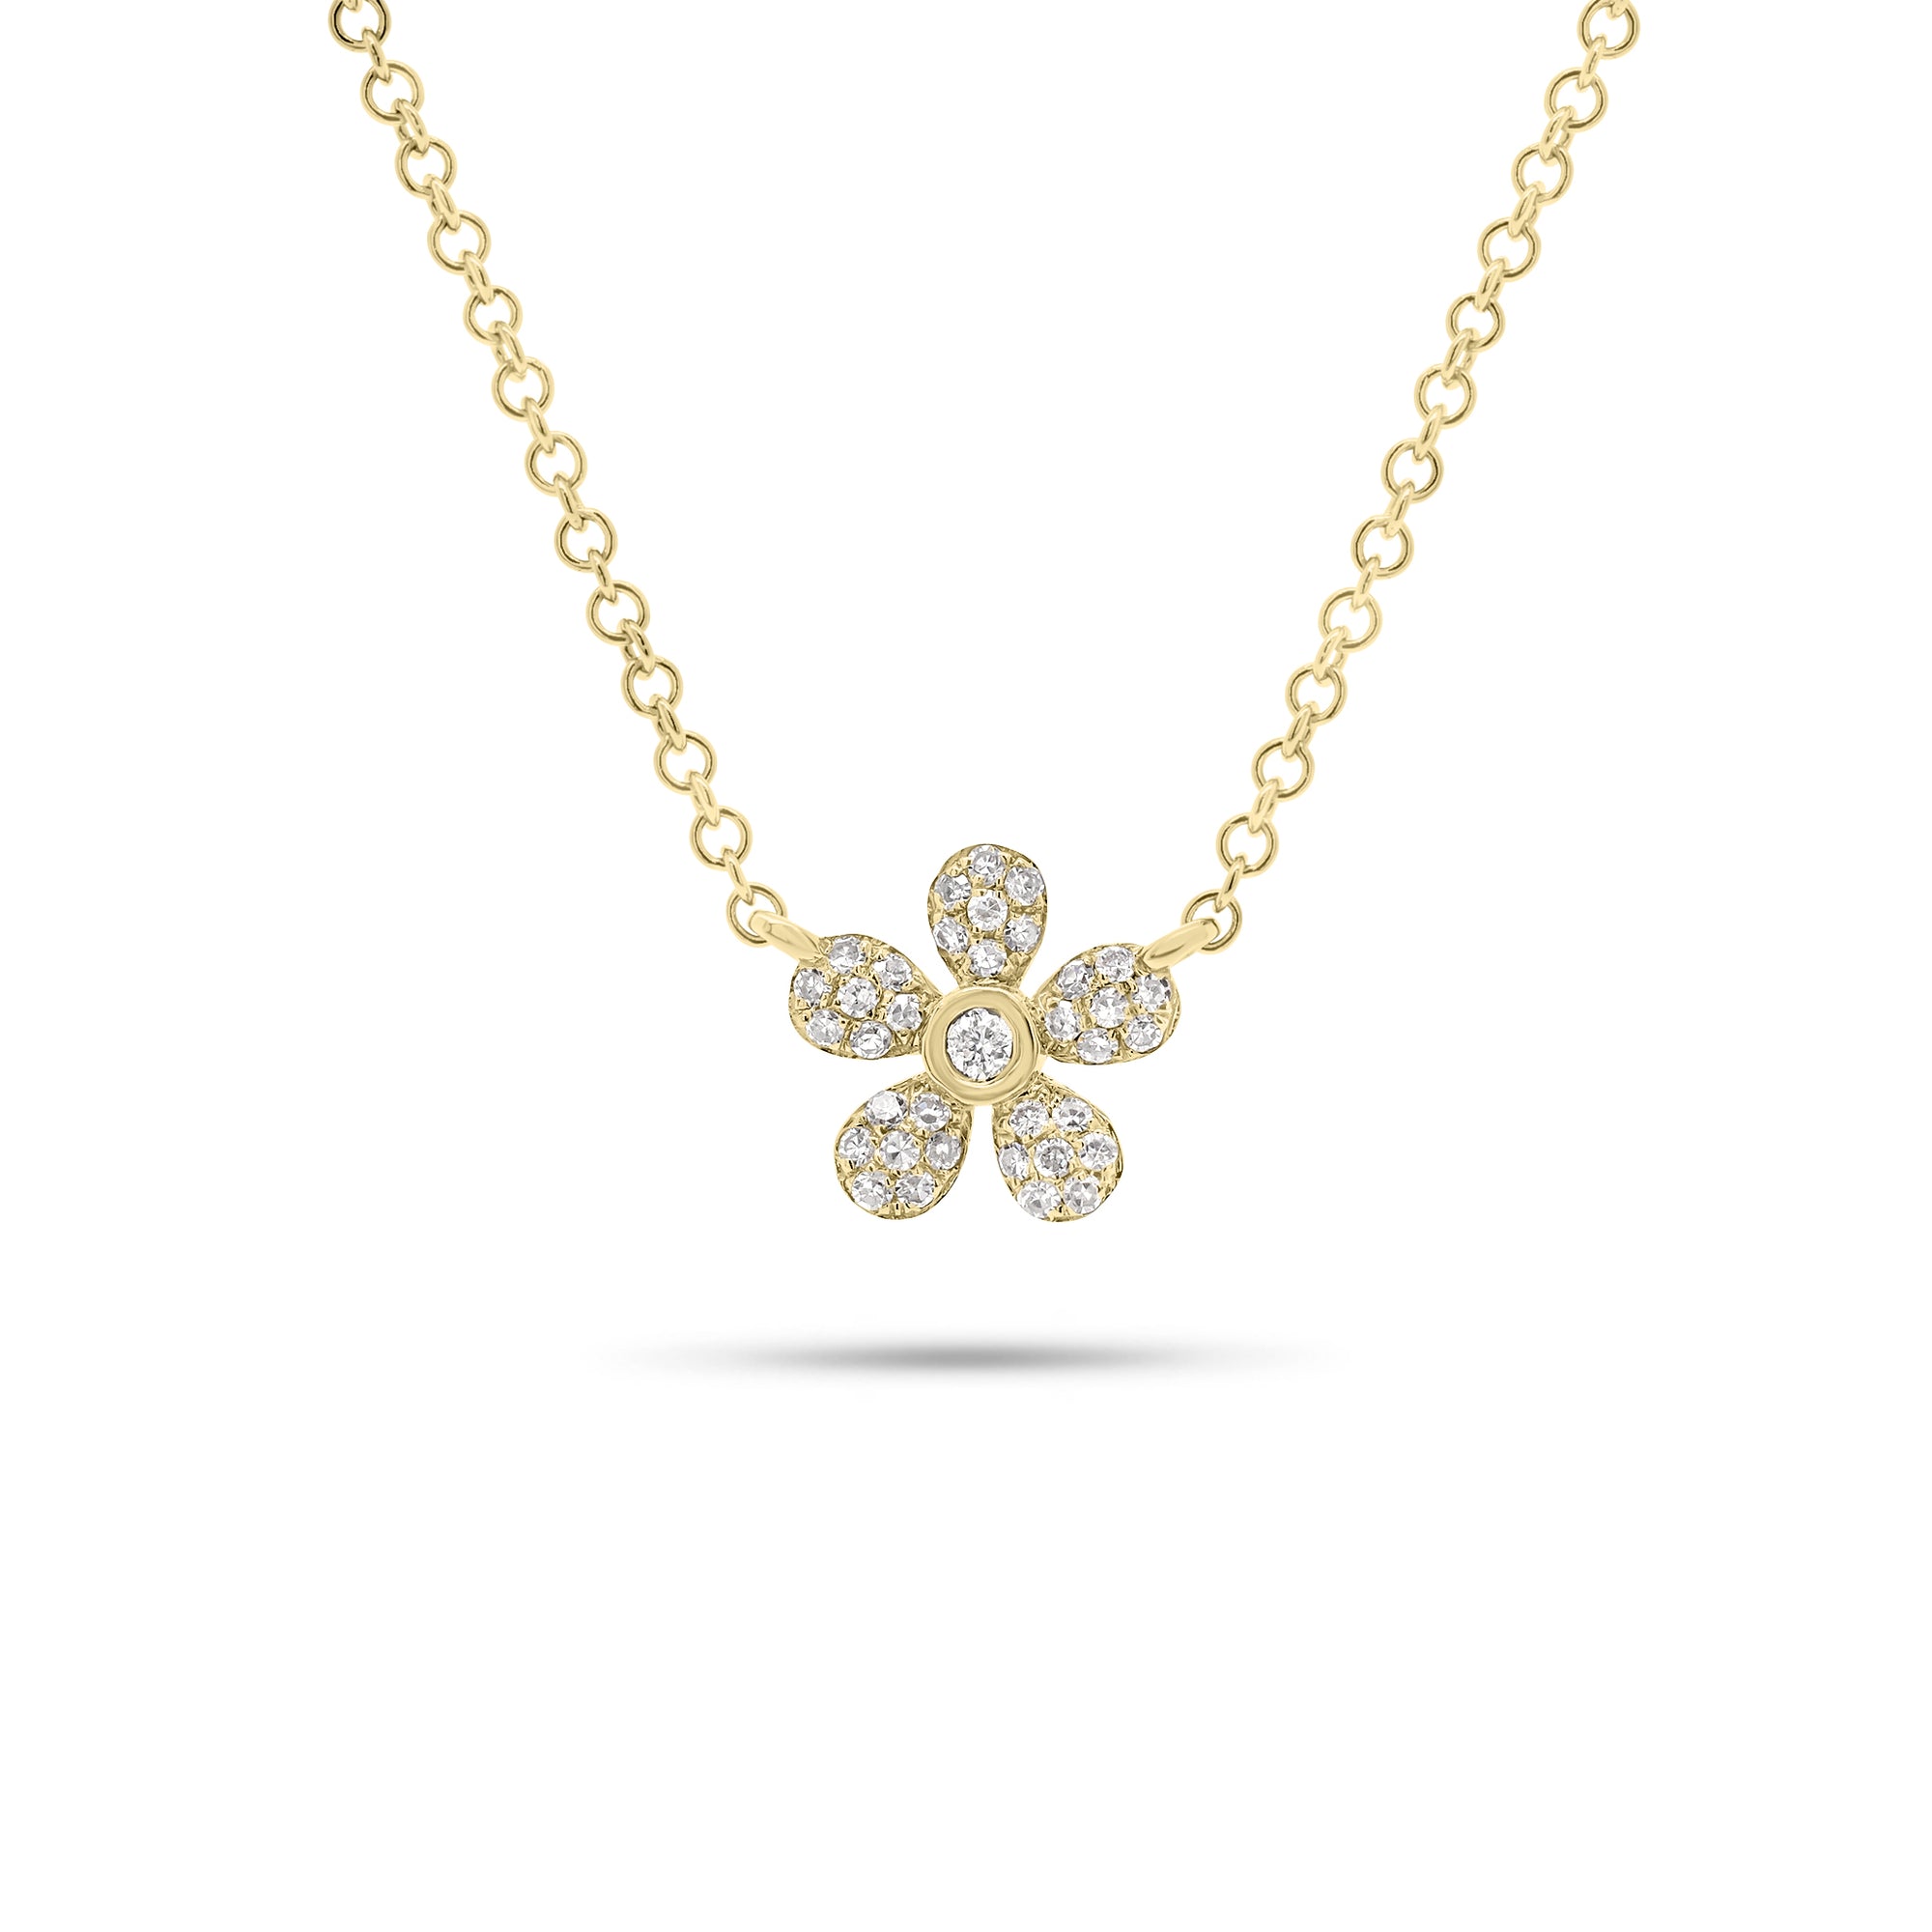 Diamond Daisy Pendant Necklace - 14K gold weighing 1.70 grams - 46 round diamonds weighing 0.11 carats